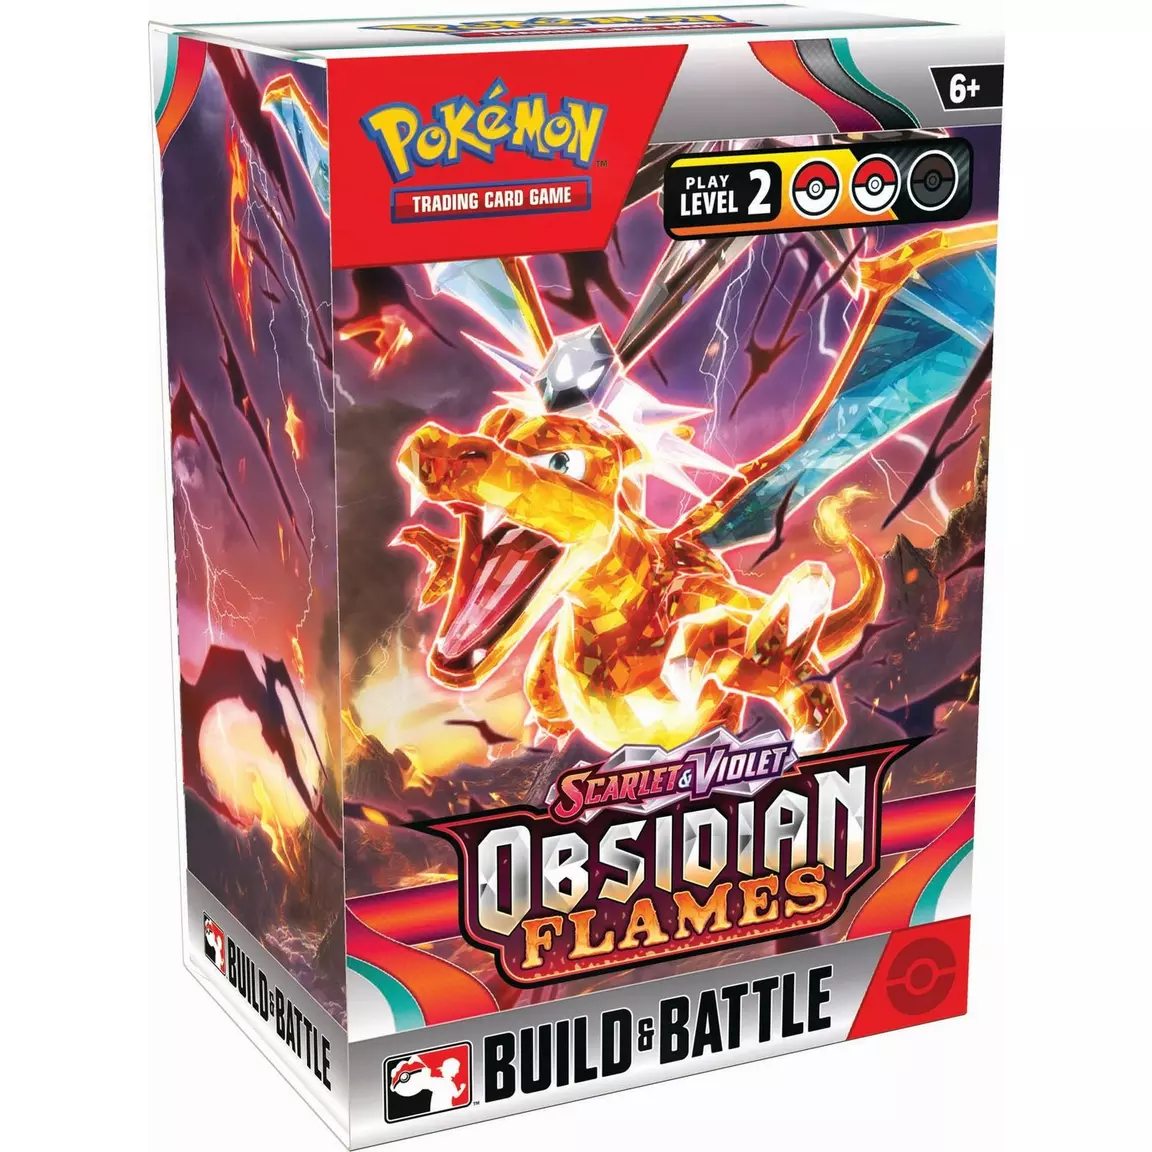 POKEMON Scarlet & Violet: Obsidian Flames PRERELEASE TAKE HOME BUILD & BATTLE PACK (SOLO) – Available 7/29/23 & Shipping 8/7